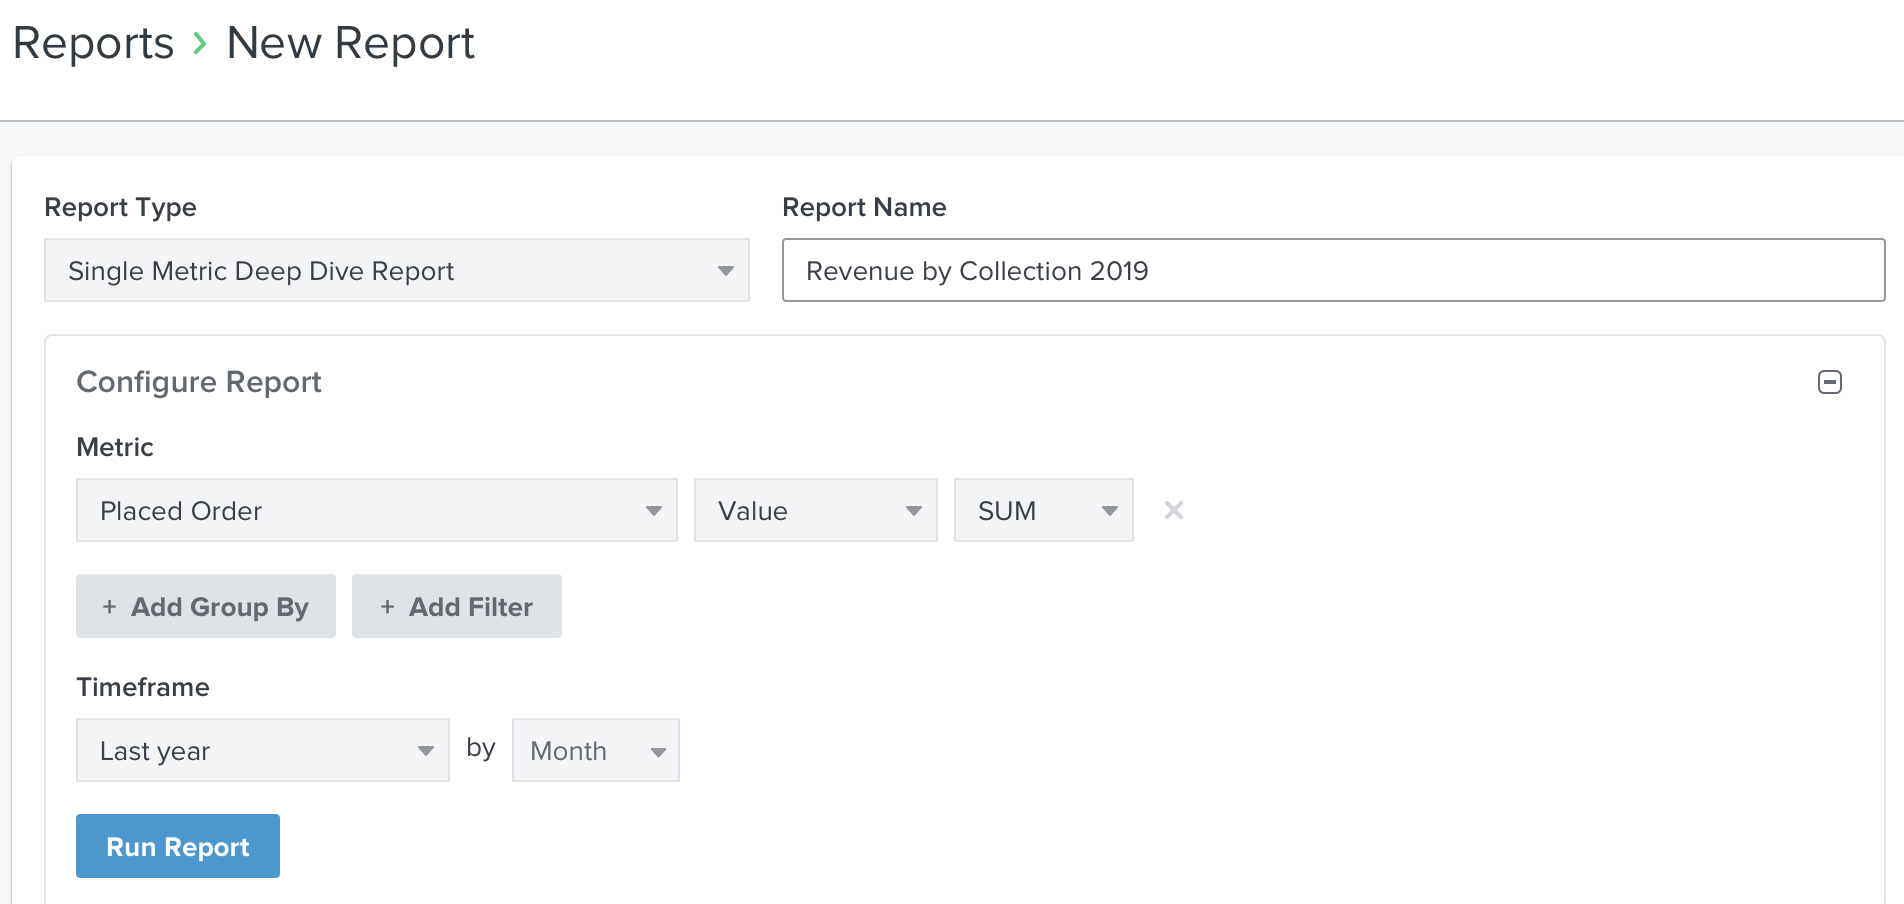 An example of a custom report that is ready to be run by clicking on the Run Report button at the bottom of the page